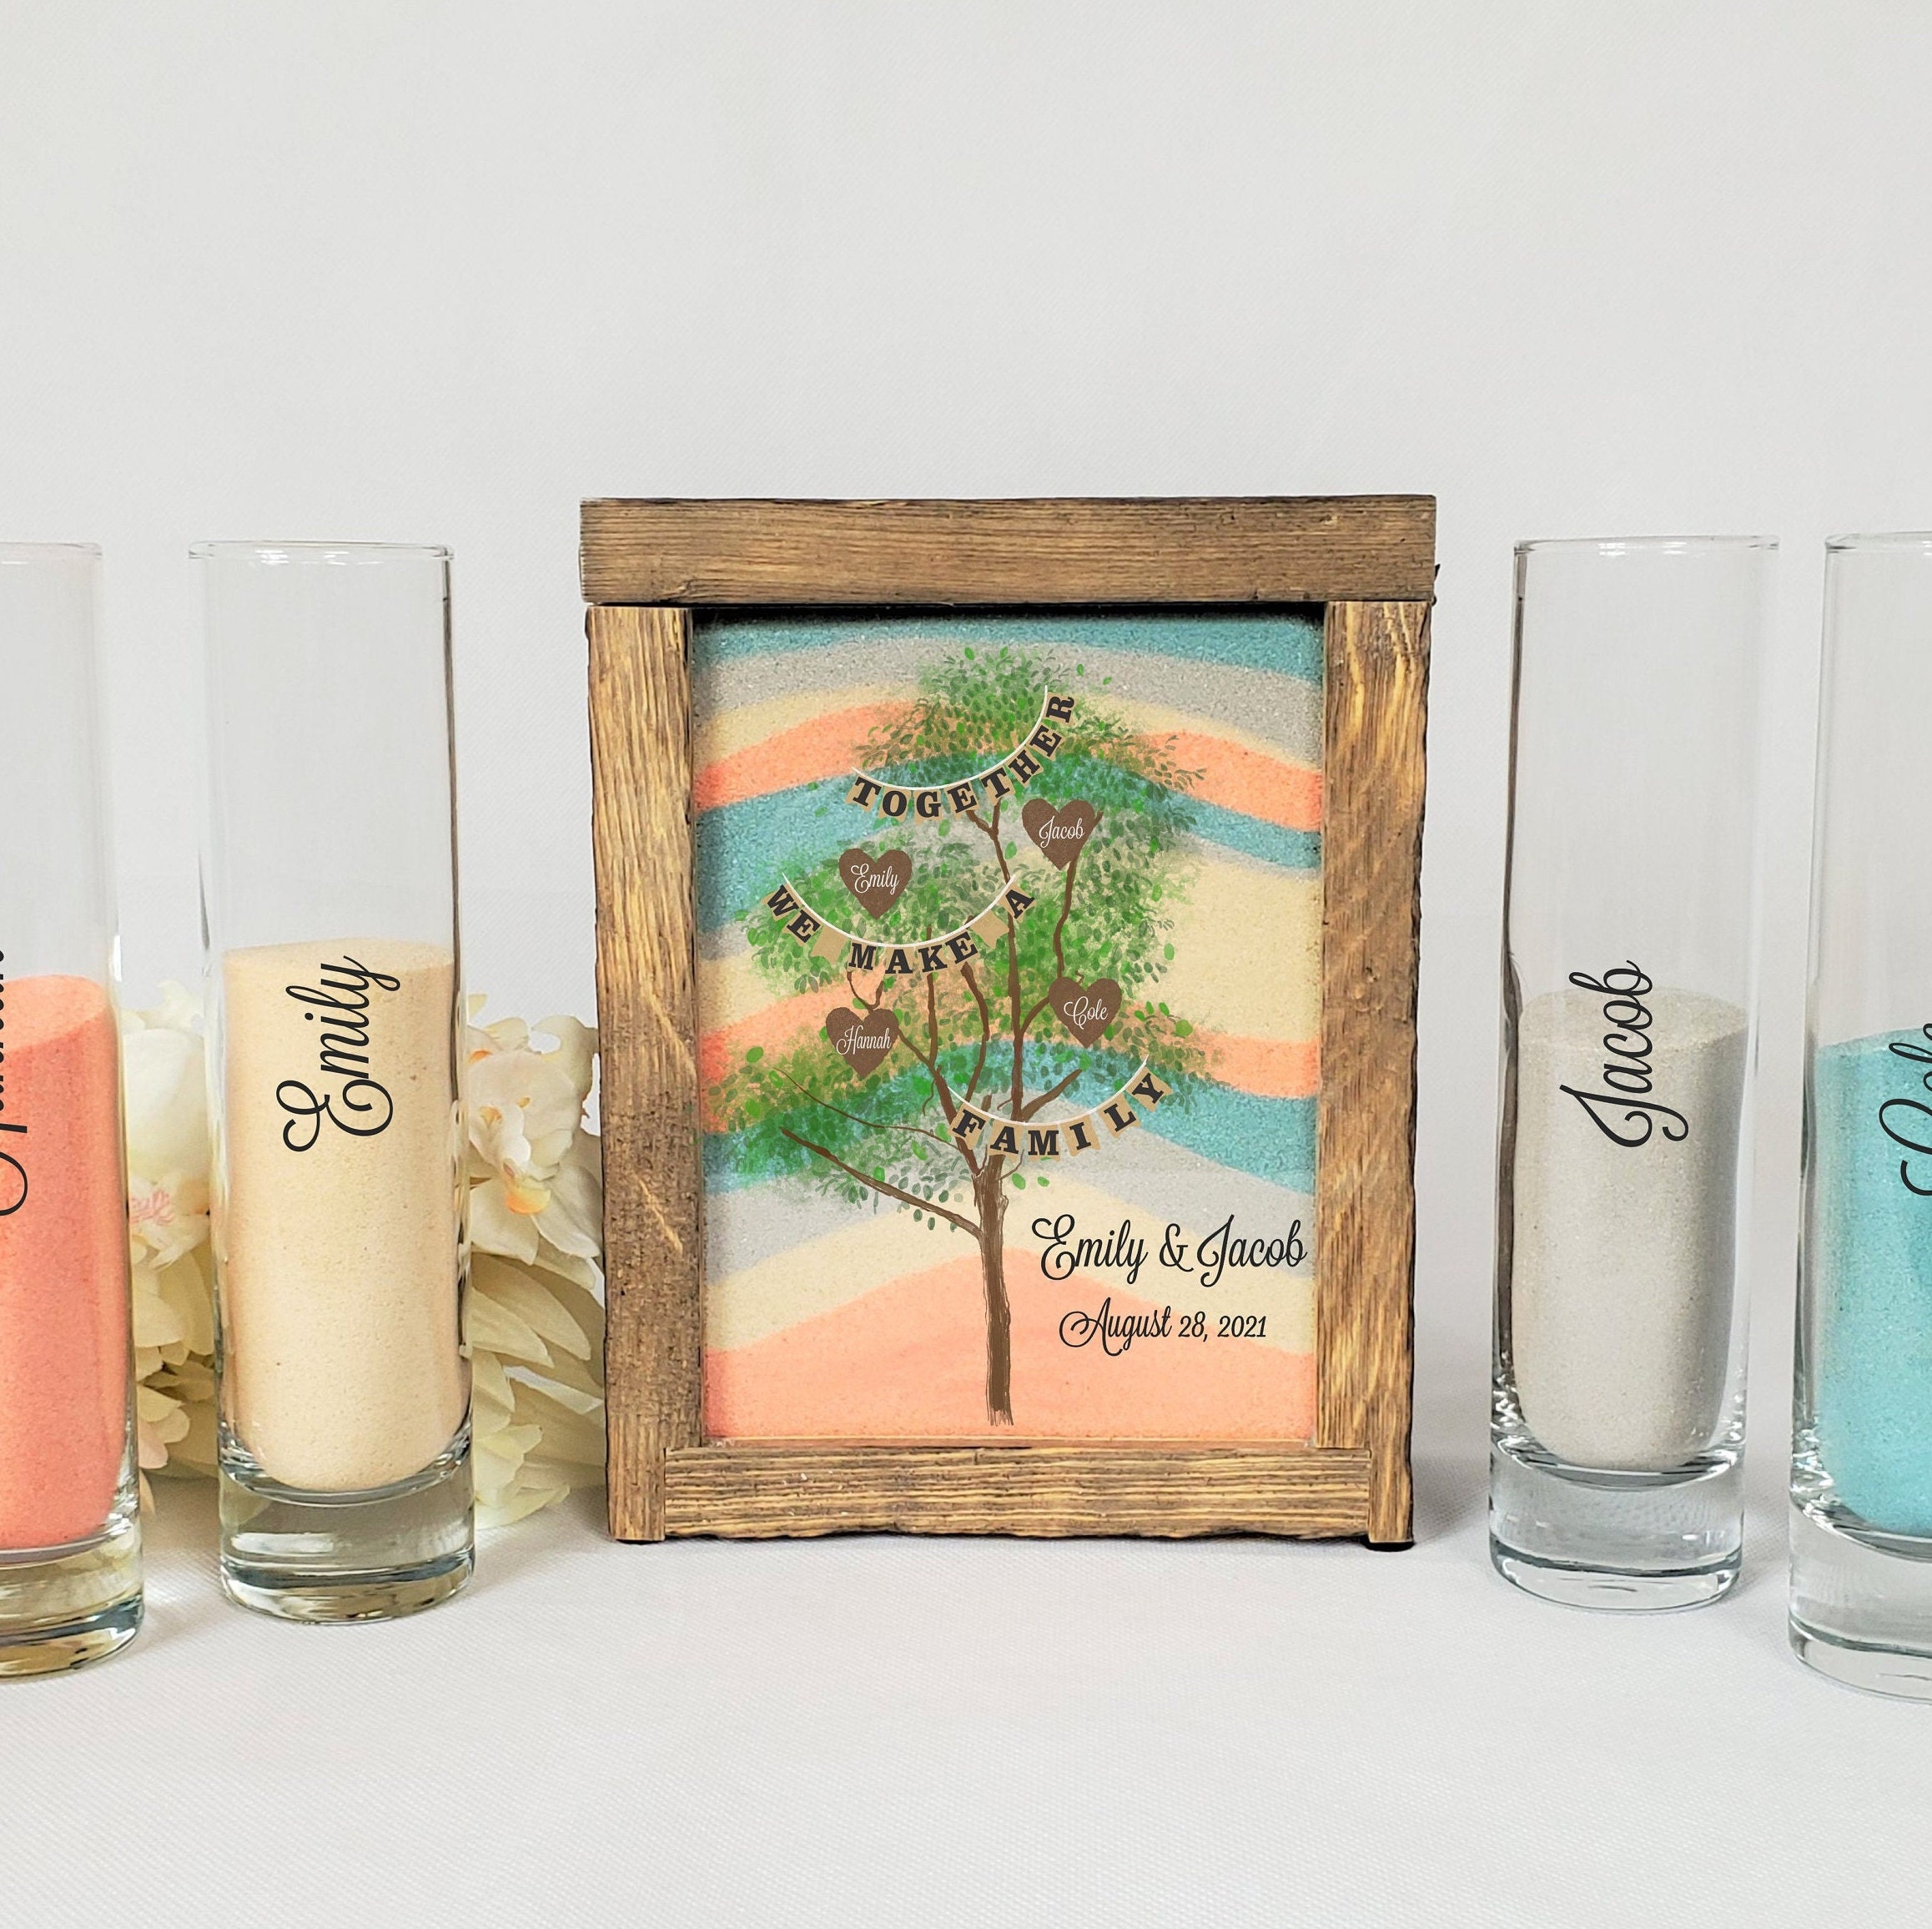 Blended Family Tree Sand Ceremony Set, Rustic Wedding Shadow Box Unity Candle Alternative, Beach Or Outdoor Decor